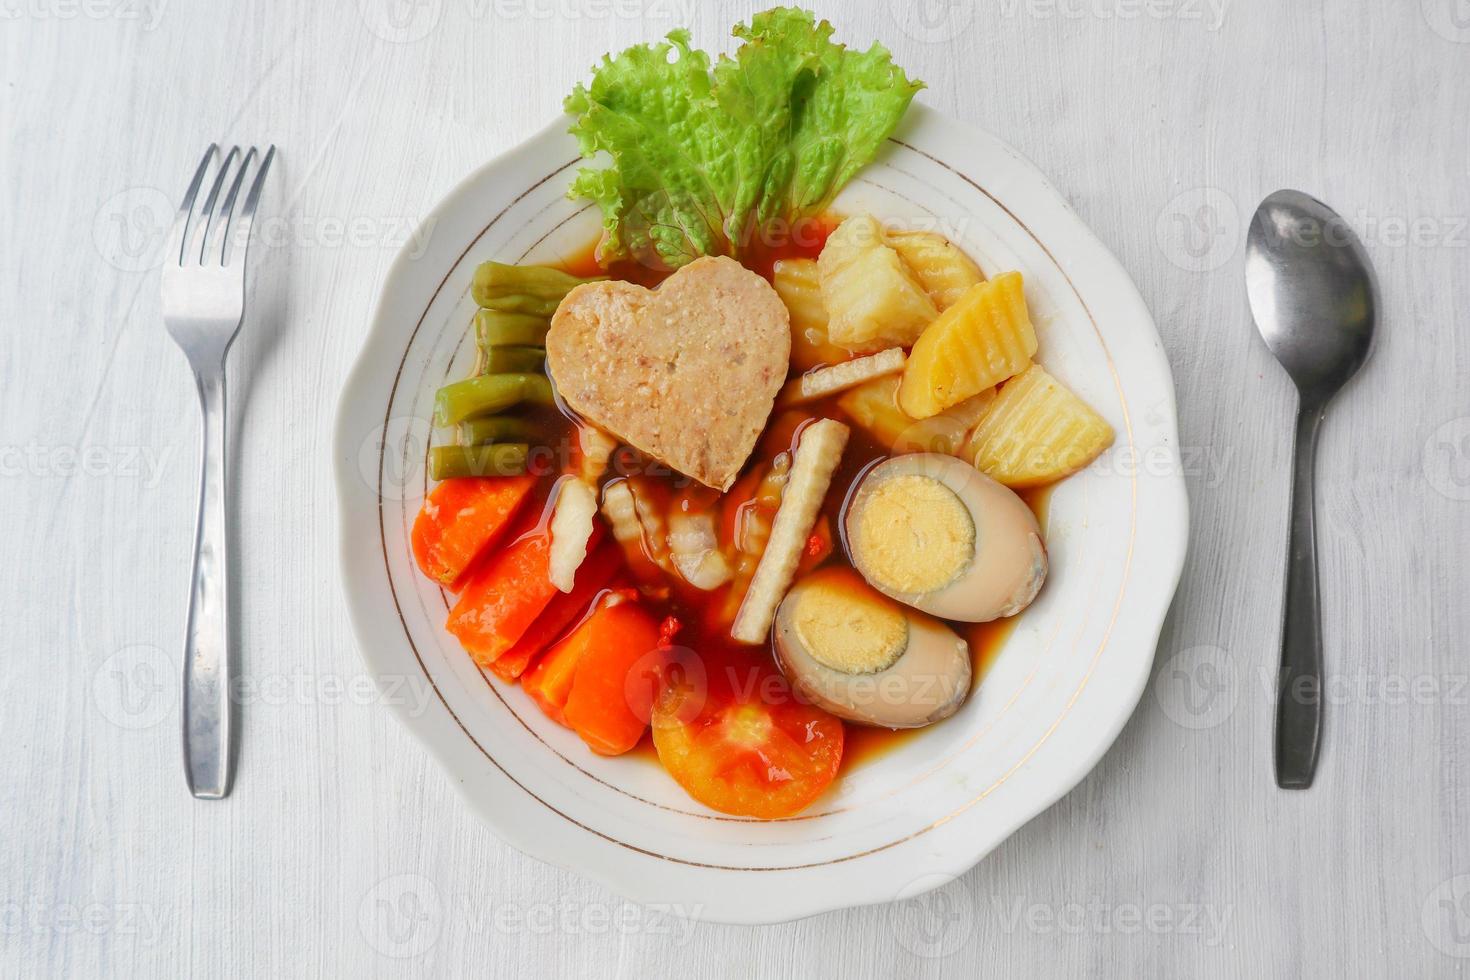 selat solo is traditional salad food from indonesia. made from hard-boiled eggs, boiled chickpeas, boiled carrots, hash browns and lettuce, steak or bistik. served on wood table photo